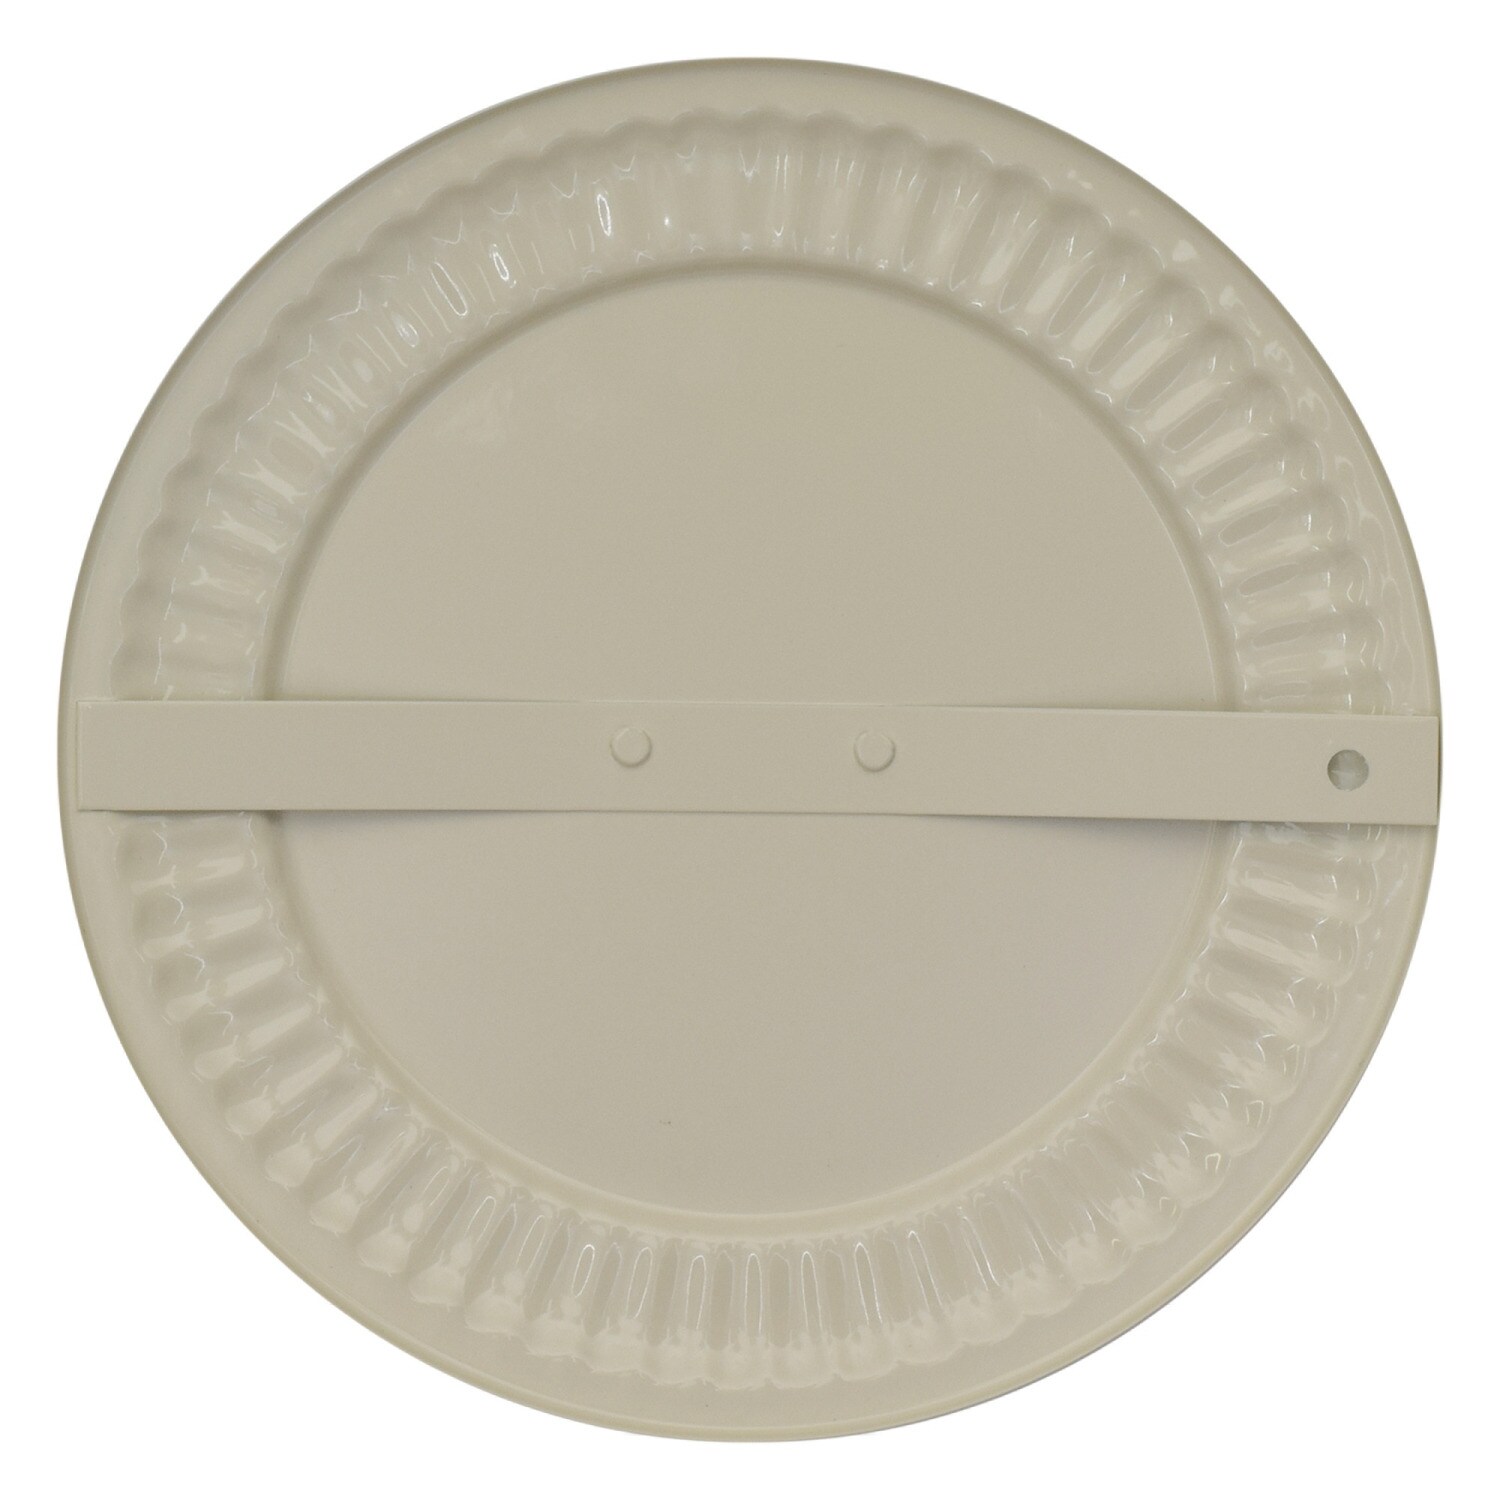 chimney hole cover plates